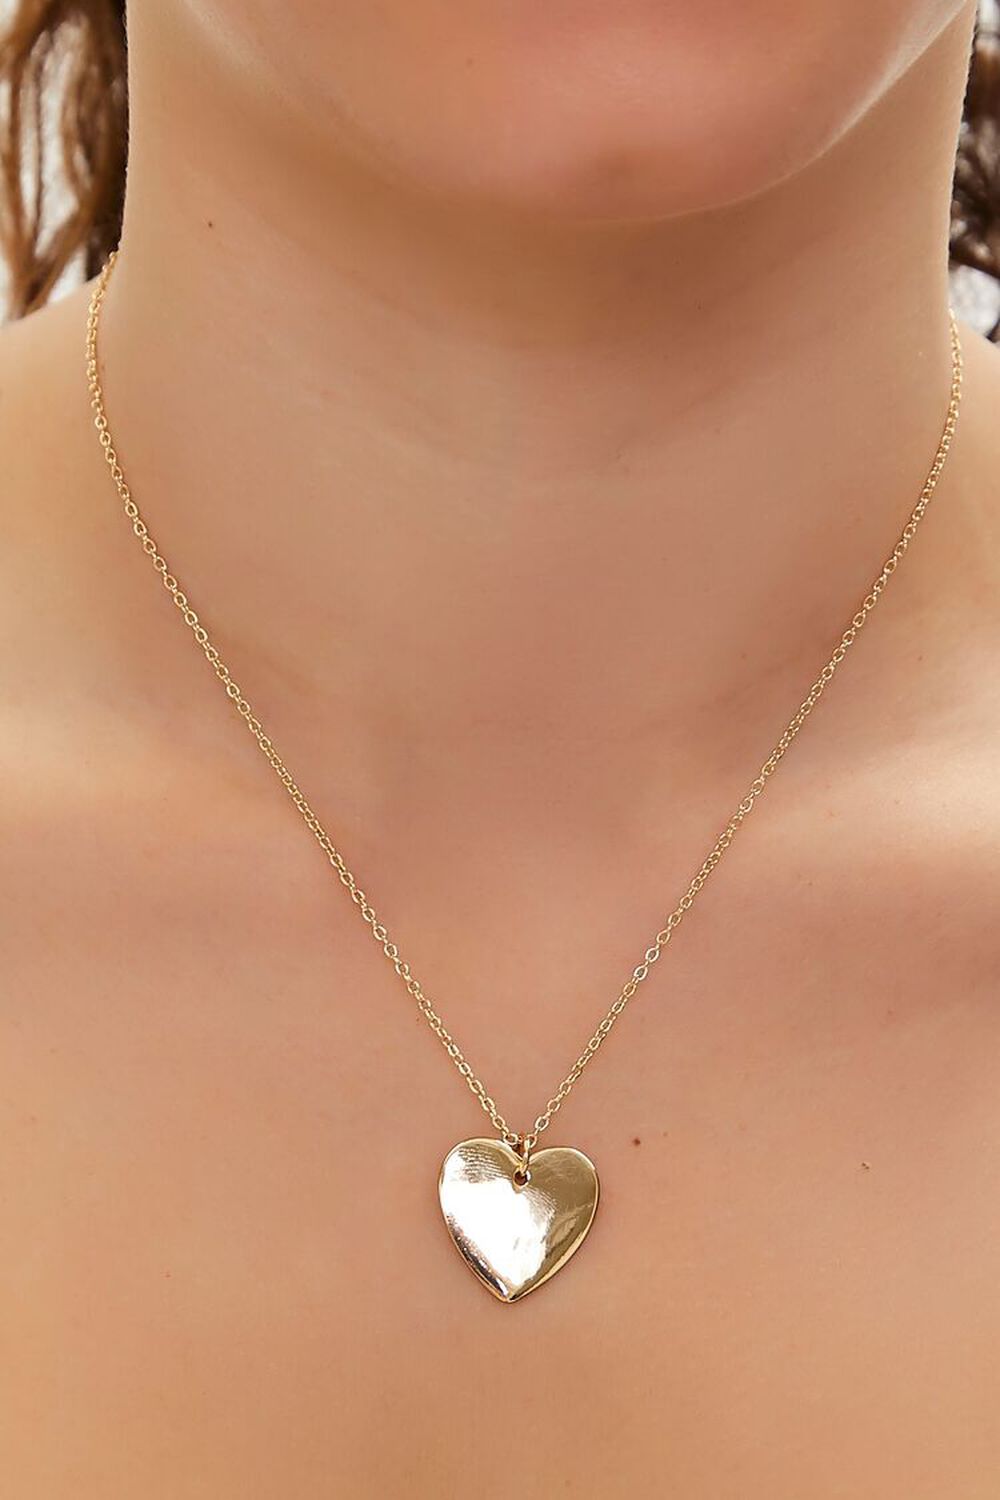 GOLD Heart Pendant Chain Necklace, image 1